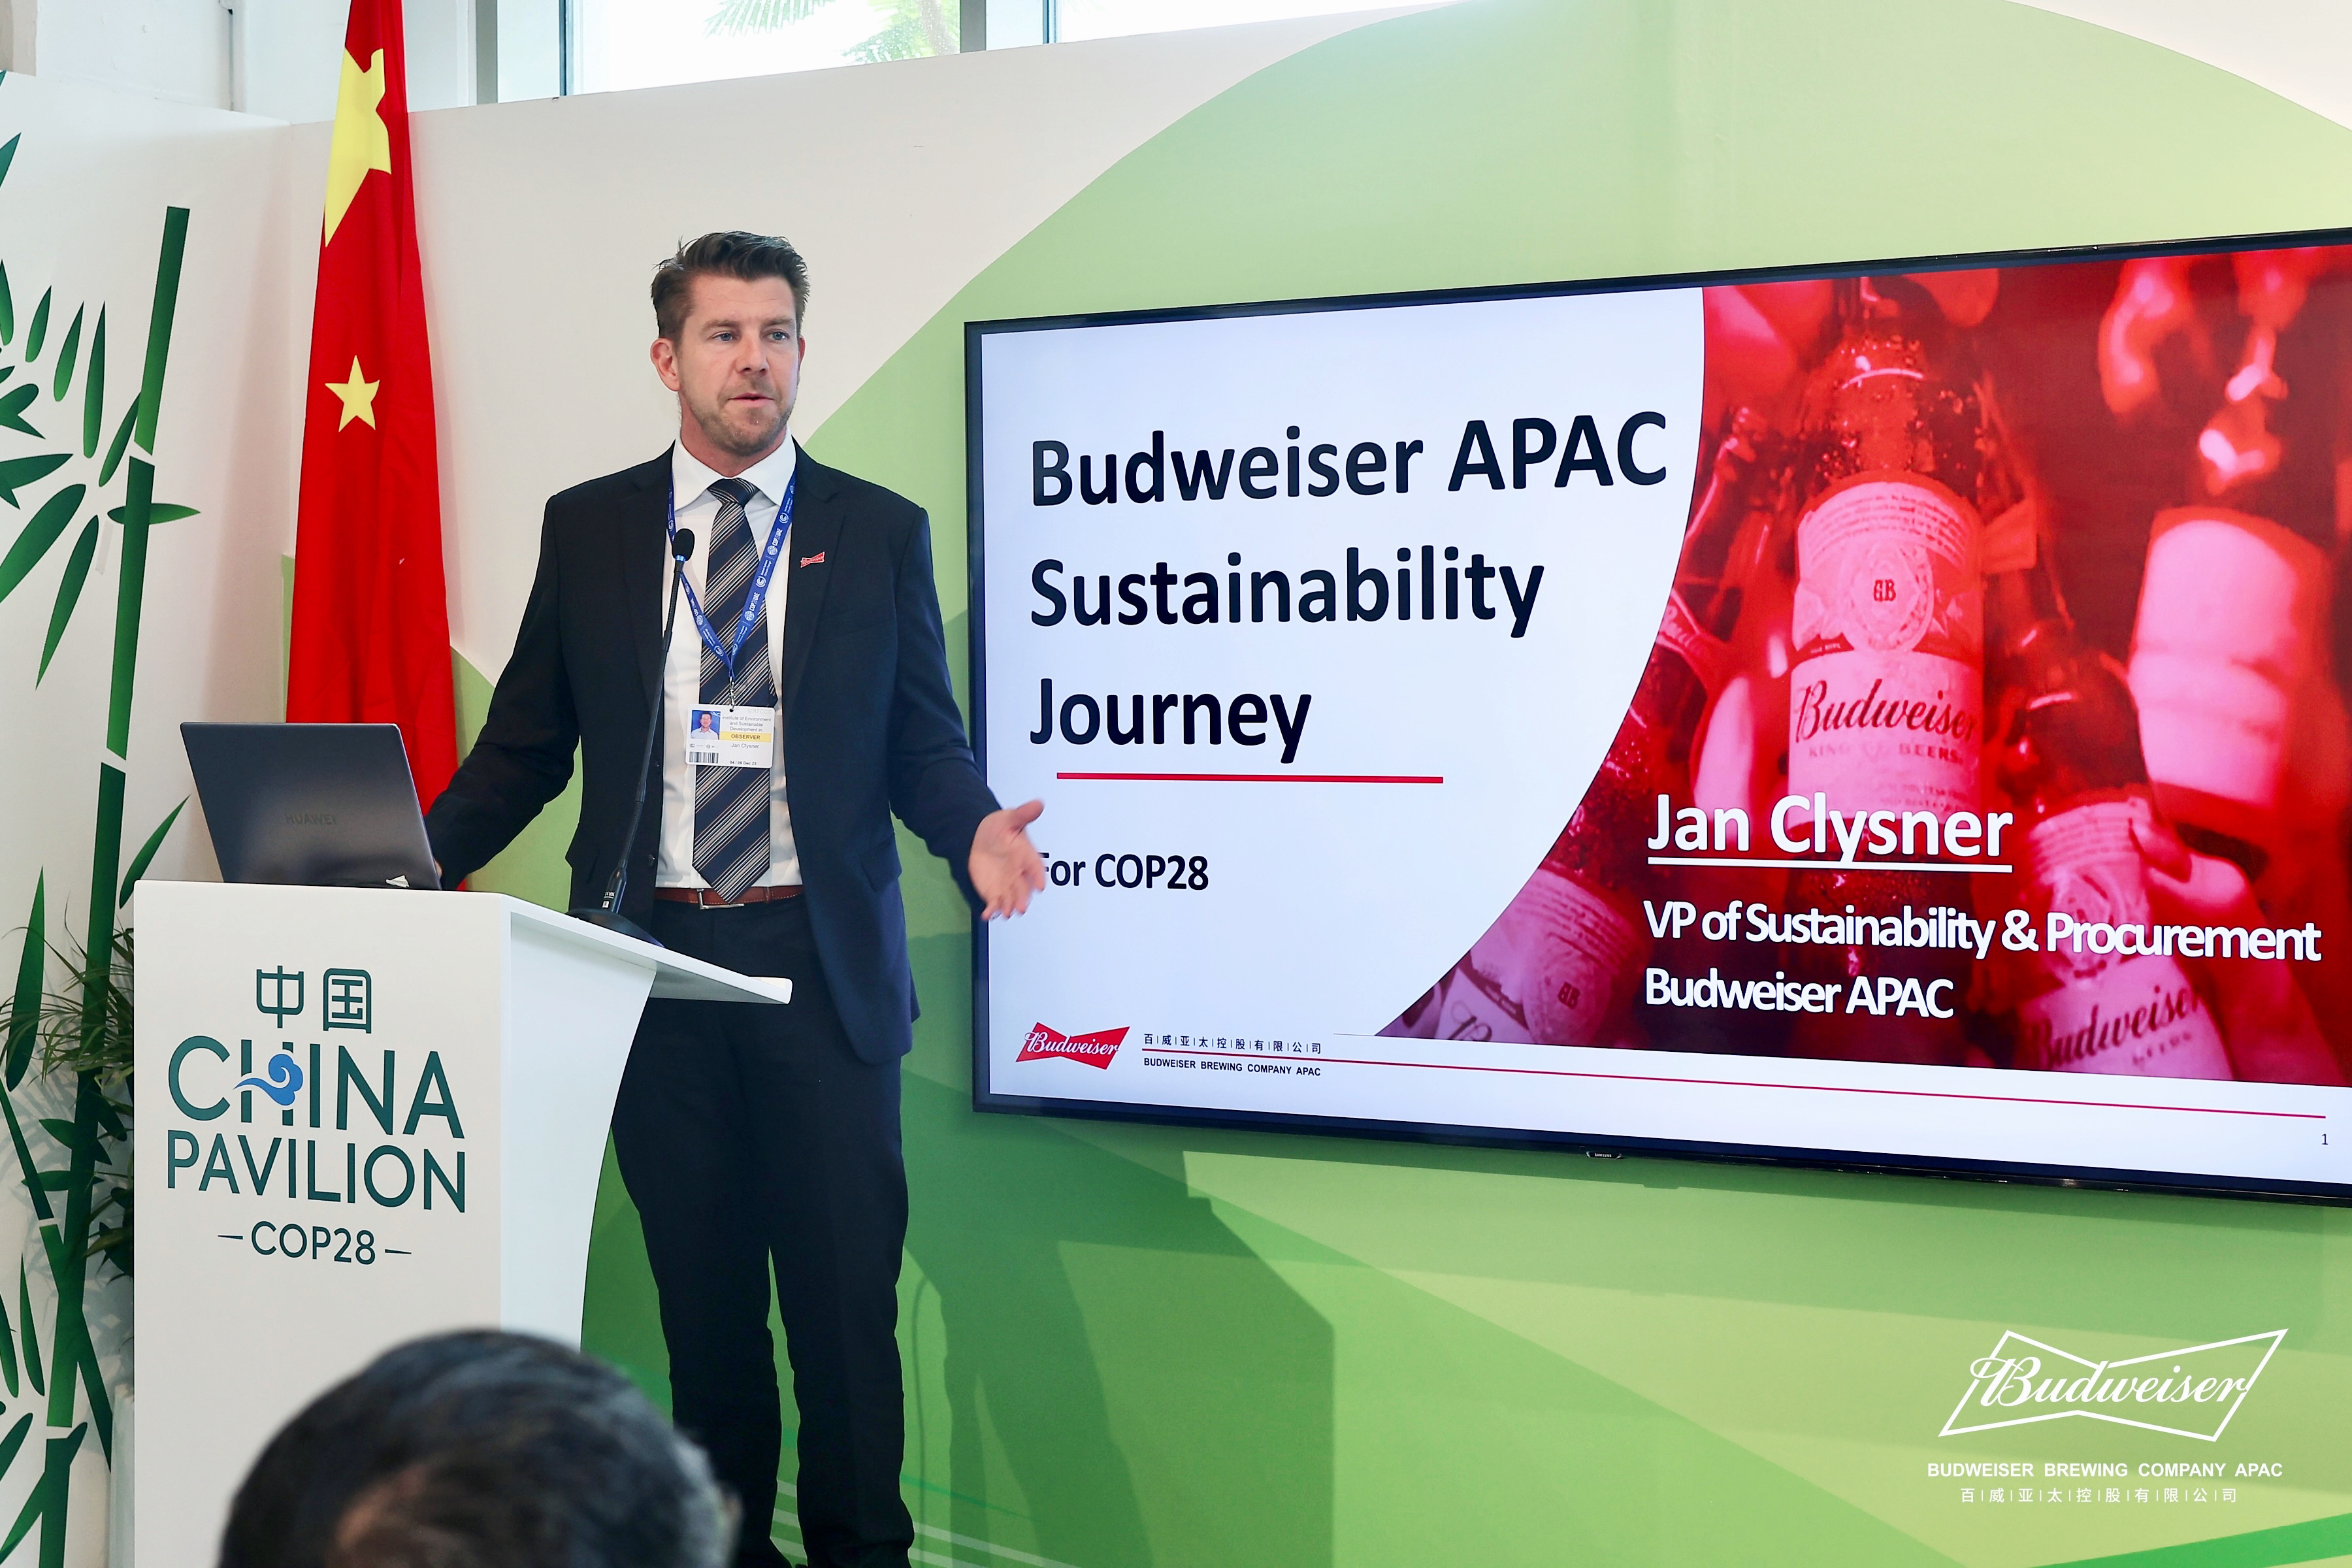 We Move Towards Our 2025 Sustainability Goals by Partnership with the Whole Value Chain, at COP28, VP of Budweiser APAC Sustainability & Procurement, Says